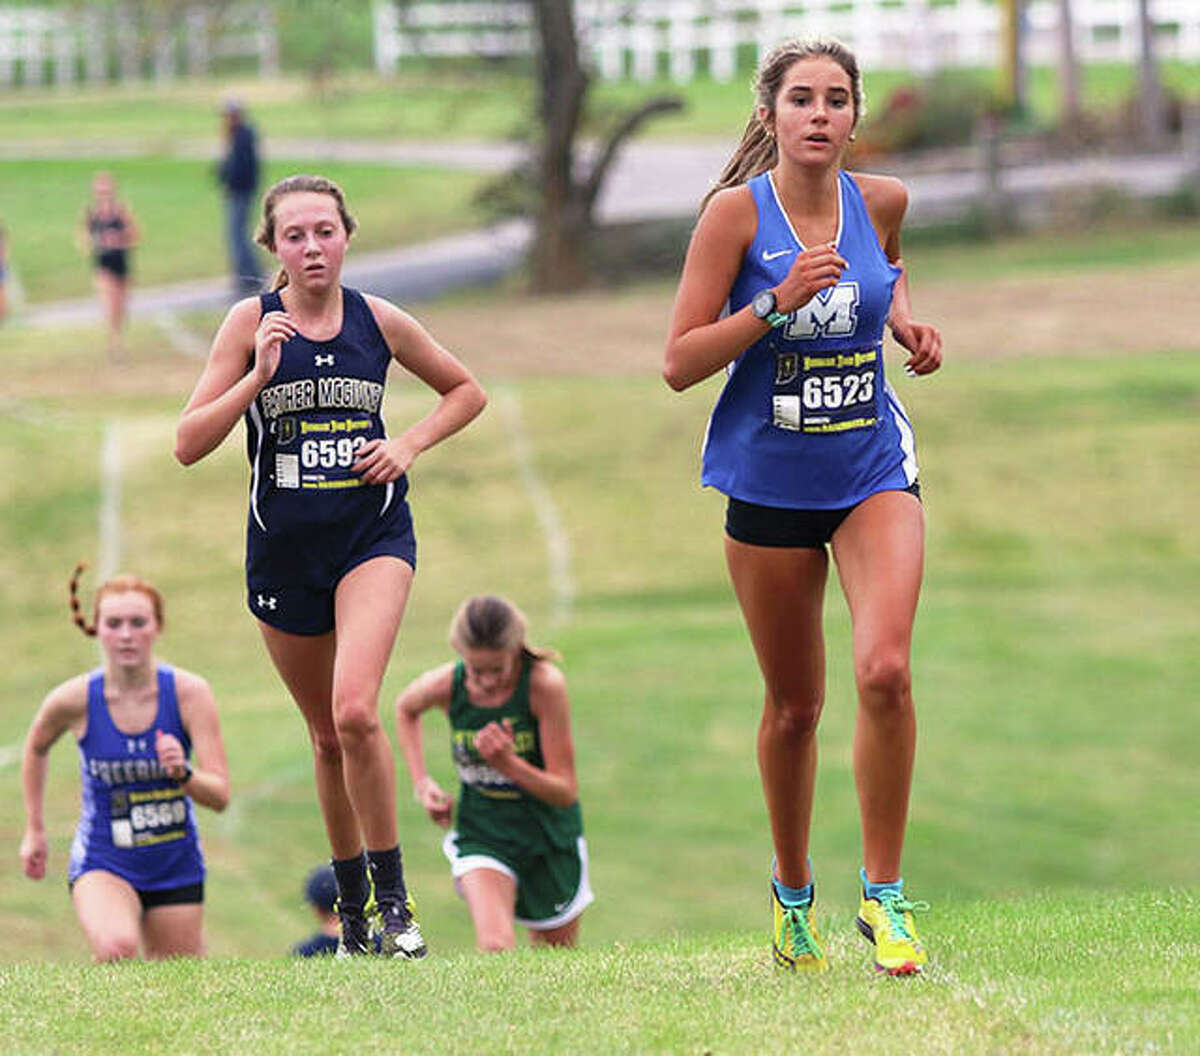 Marquette Catholic’s Kailey Vickrey (right) and Father McGivney’s Claire Stanhaus (left) run midway through the race Saturday at the Class 1A regional at Clinton Hills Conservation Park in Swansea.